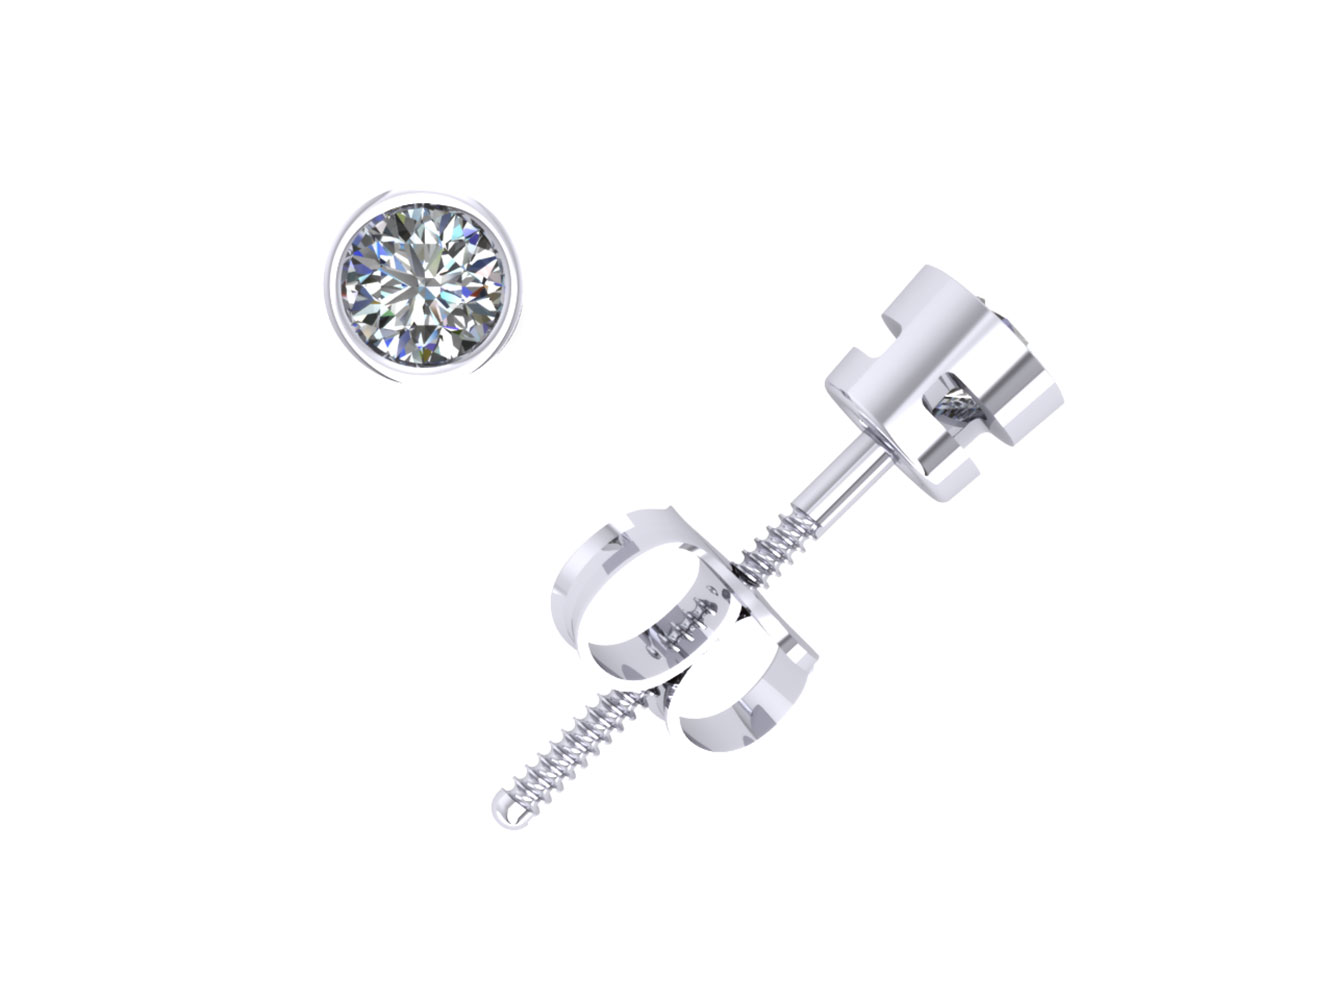 Jewel We Sell Natural 0.20Ct Round Cut Diamond Stud Earrings 14k White or Yellow Gold Bezel Set G SI1